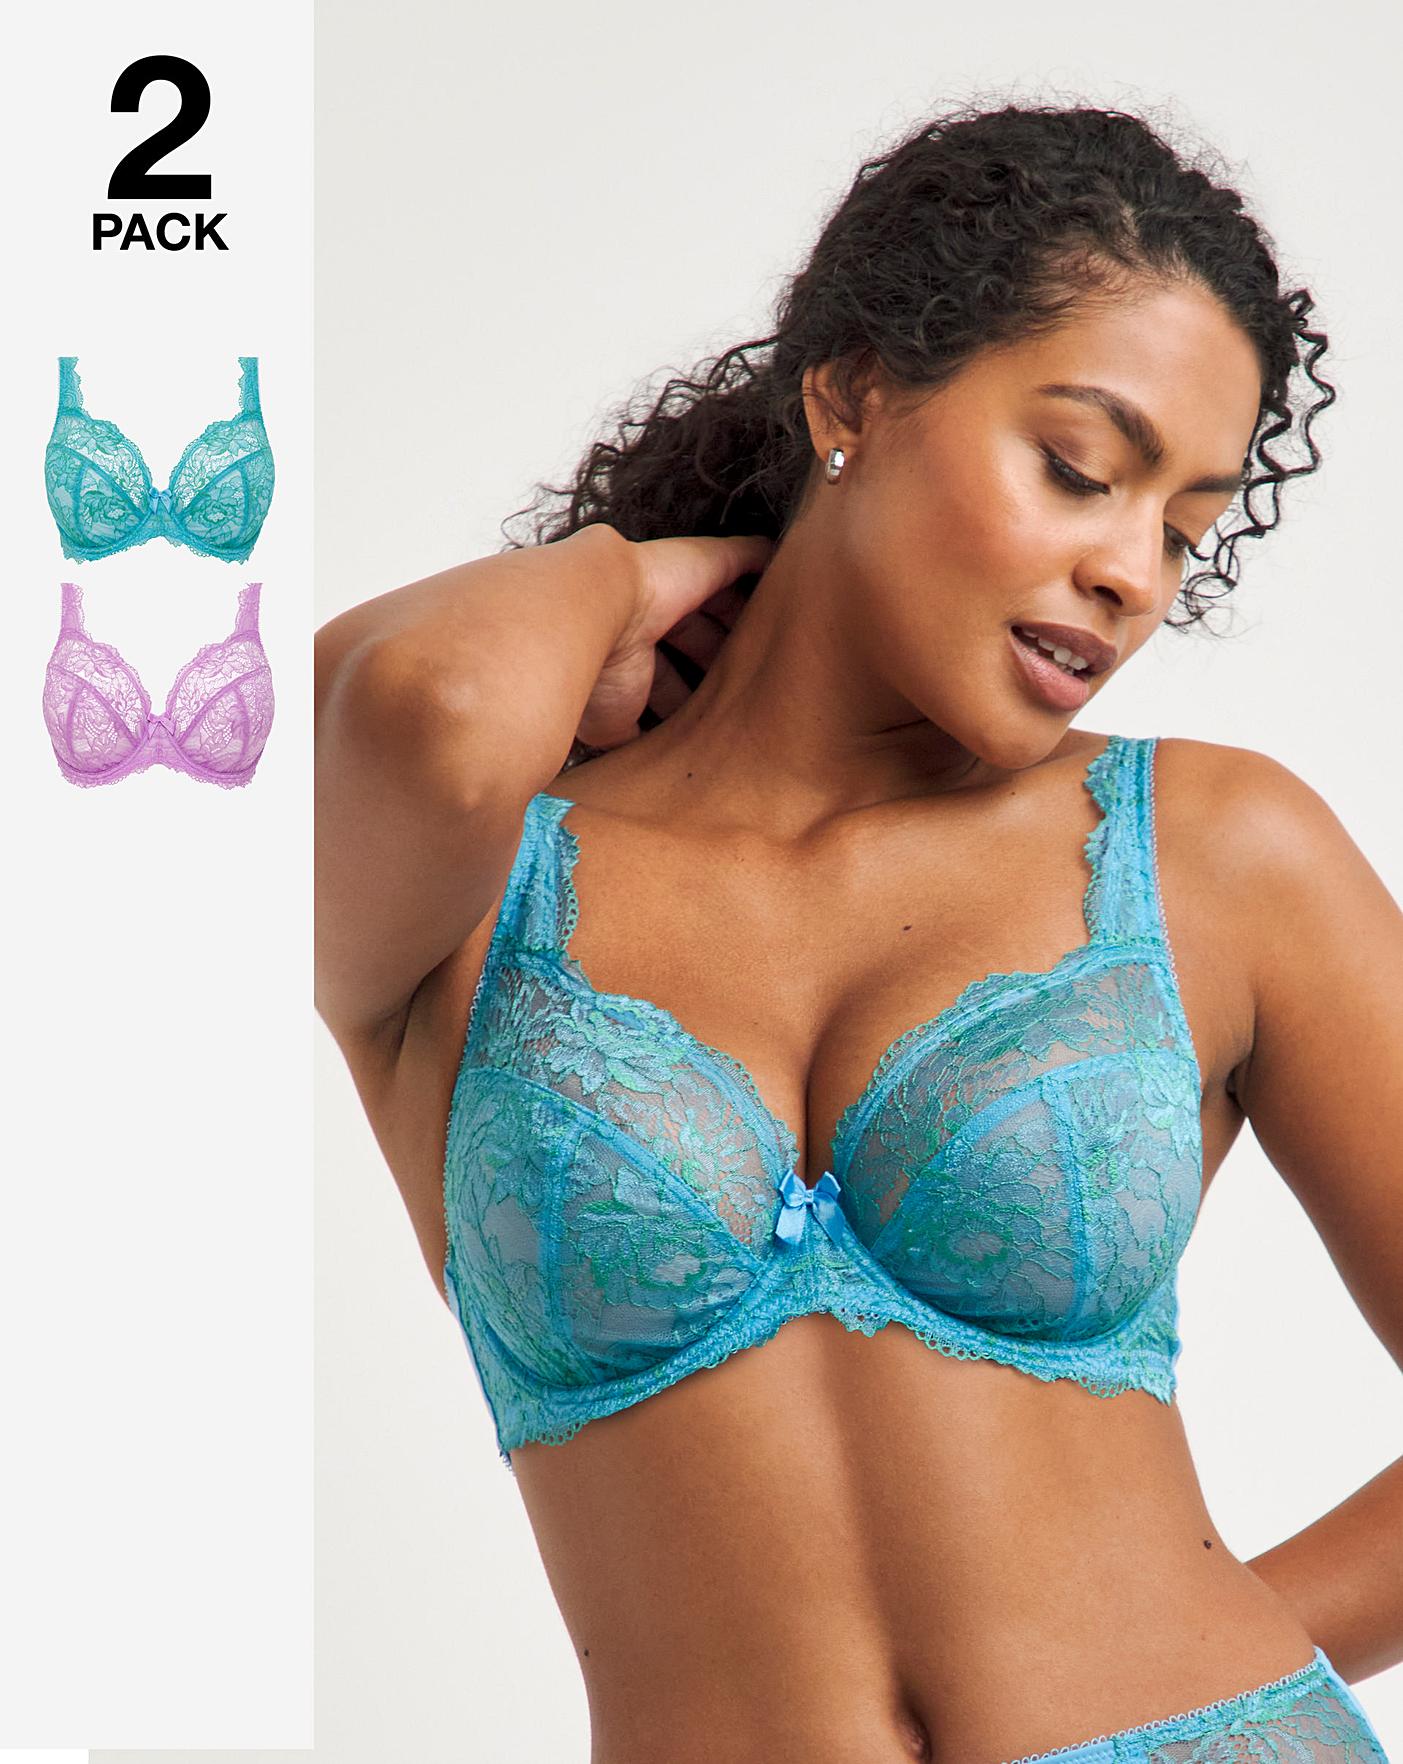 Underwire in 40DD Bra Size Everyday, Full Cup and Larger Cup Bras